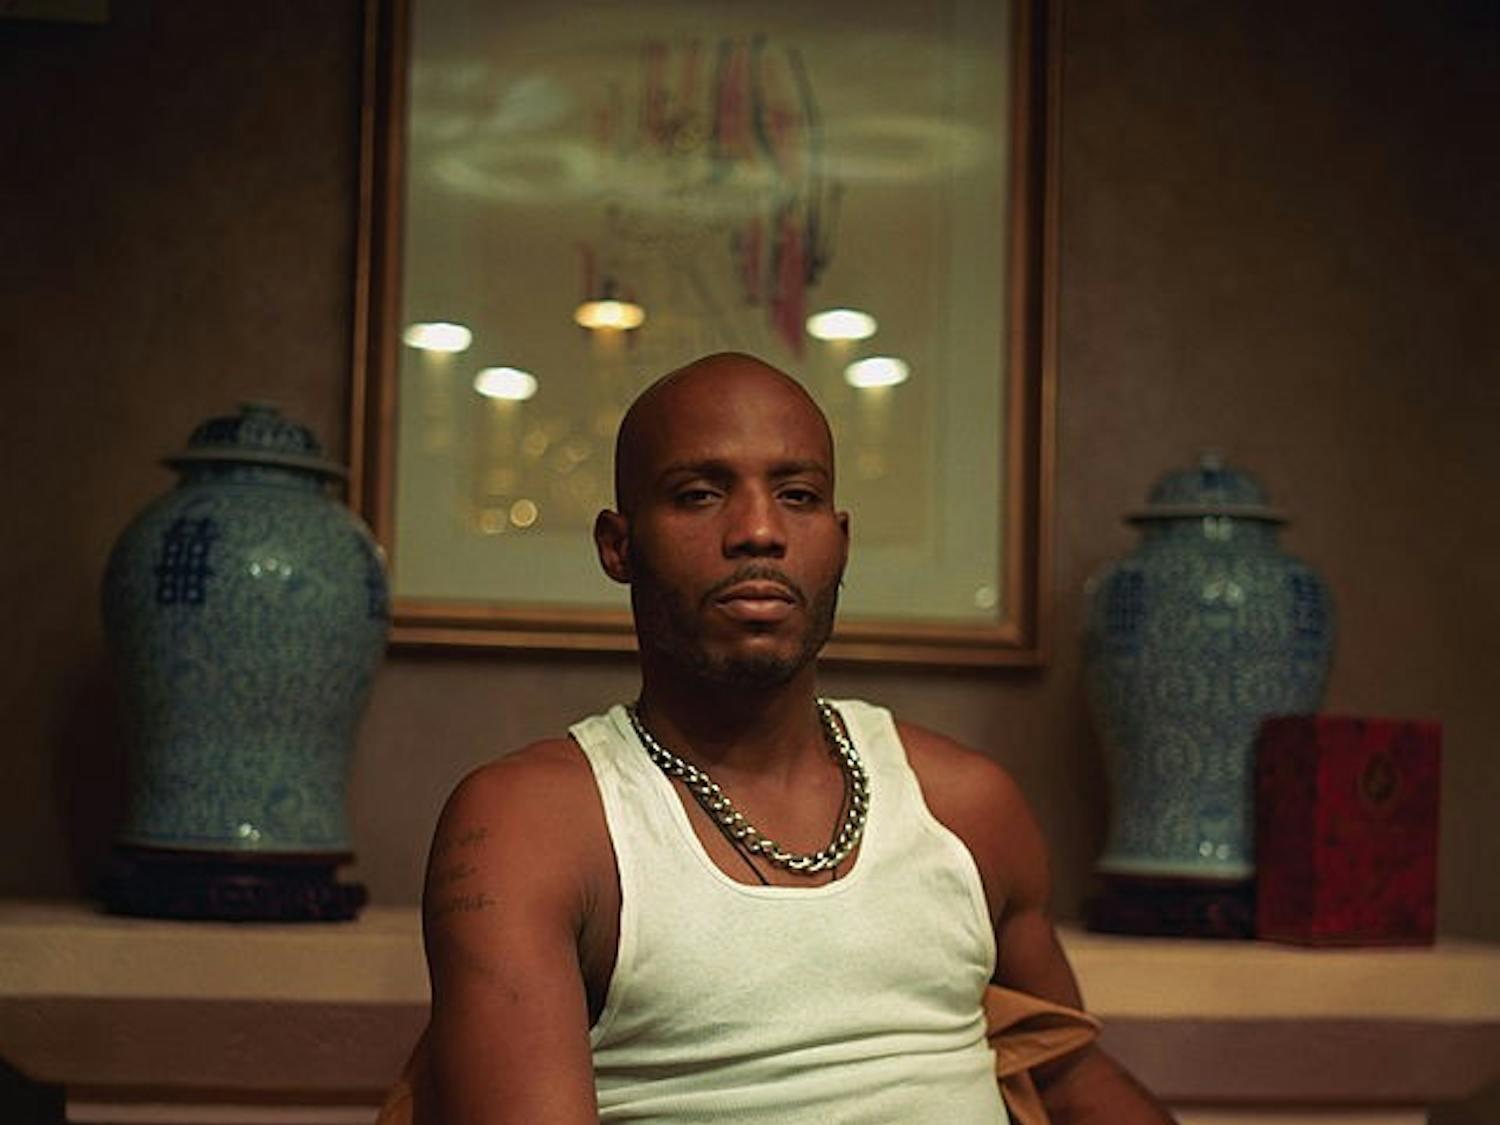 DMX was one of the most prolific rappers of the late ‘90s to early ‘00s, taking the music industry by storm with his multi-platinum album, “It’s Dark and Hell is Hot.”